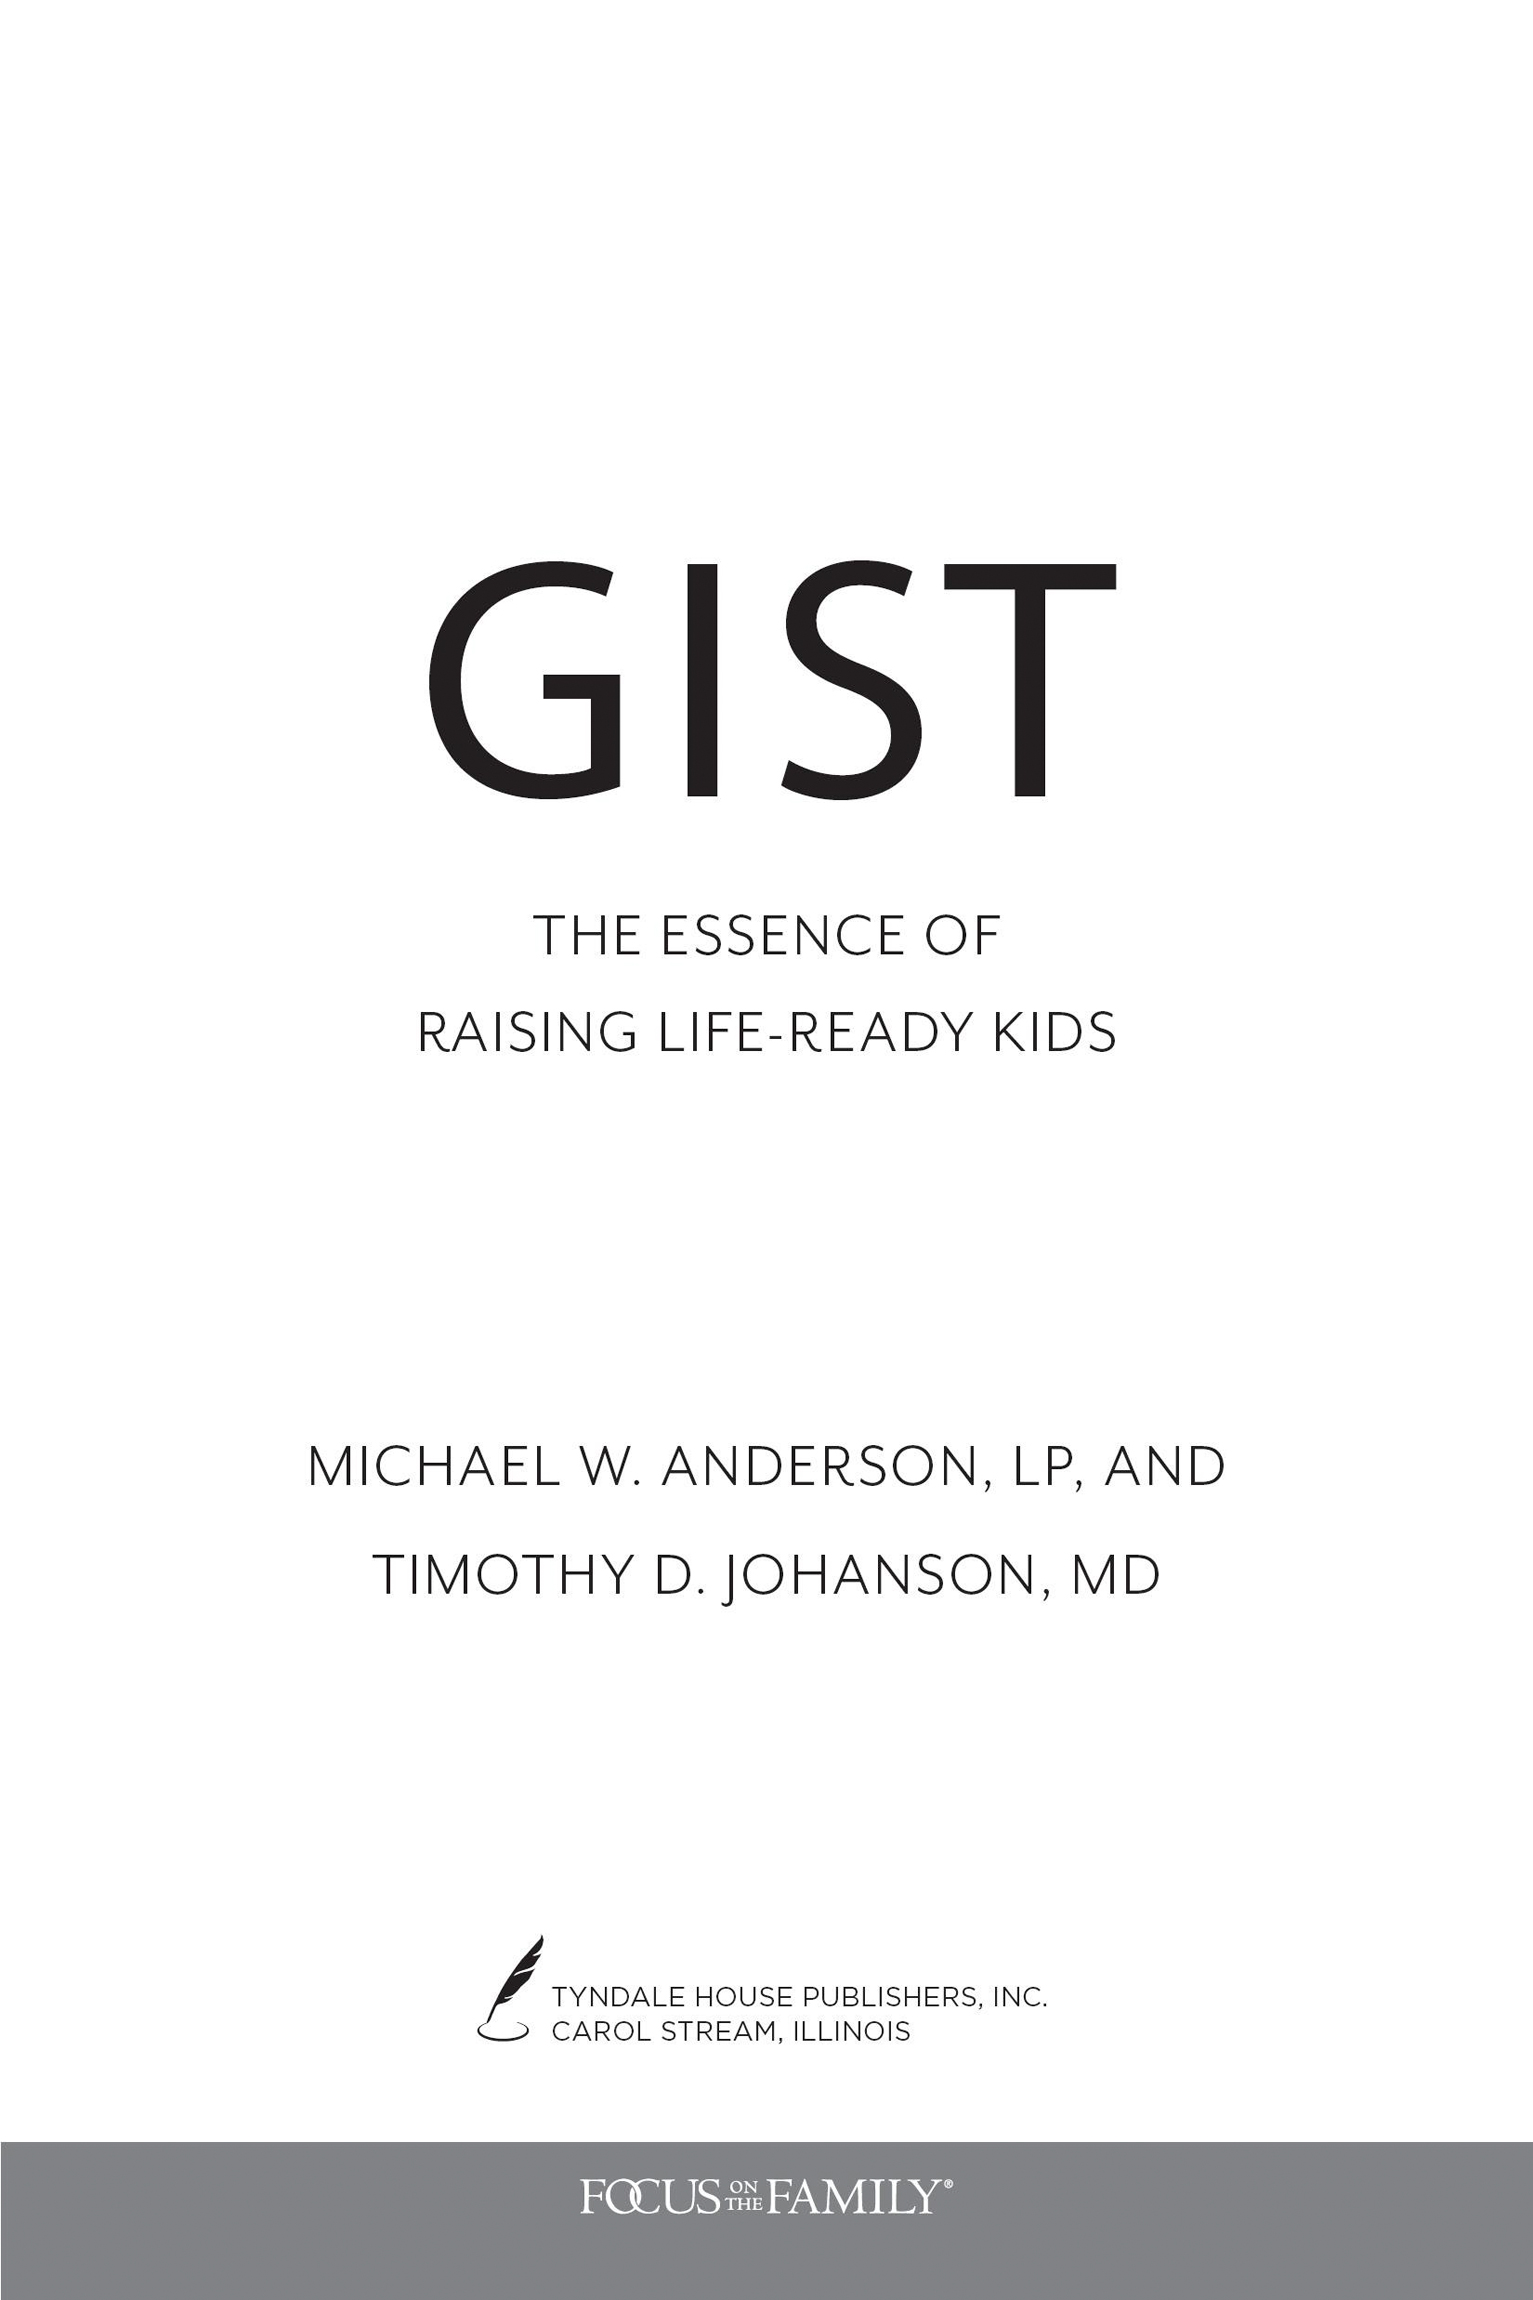 Gist is a potent dose of advice from a pediatrician and a child psychologist - photo 2